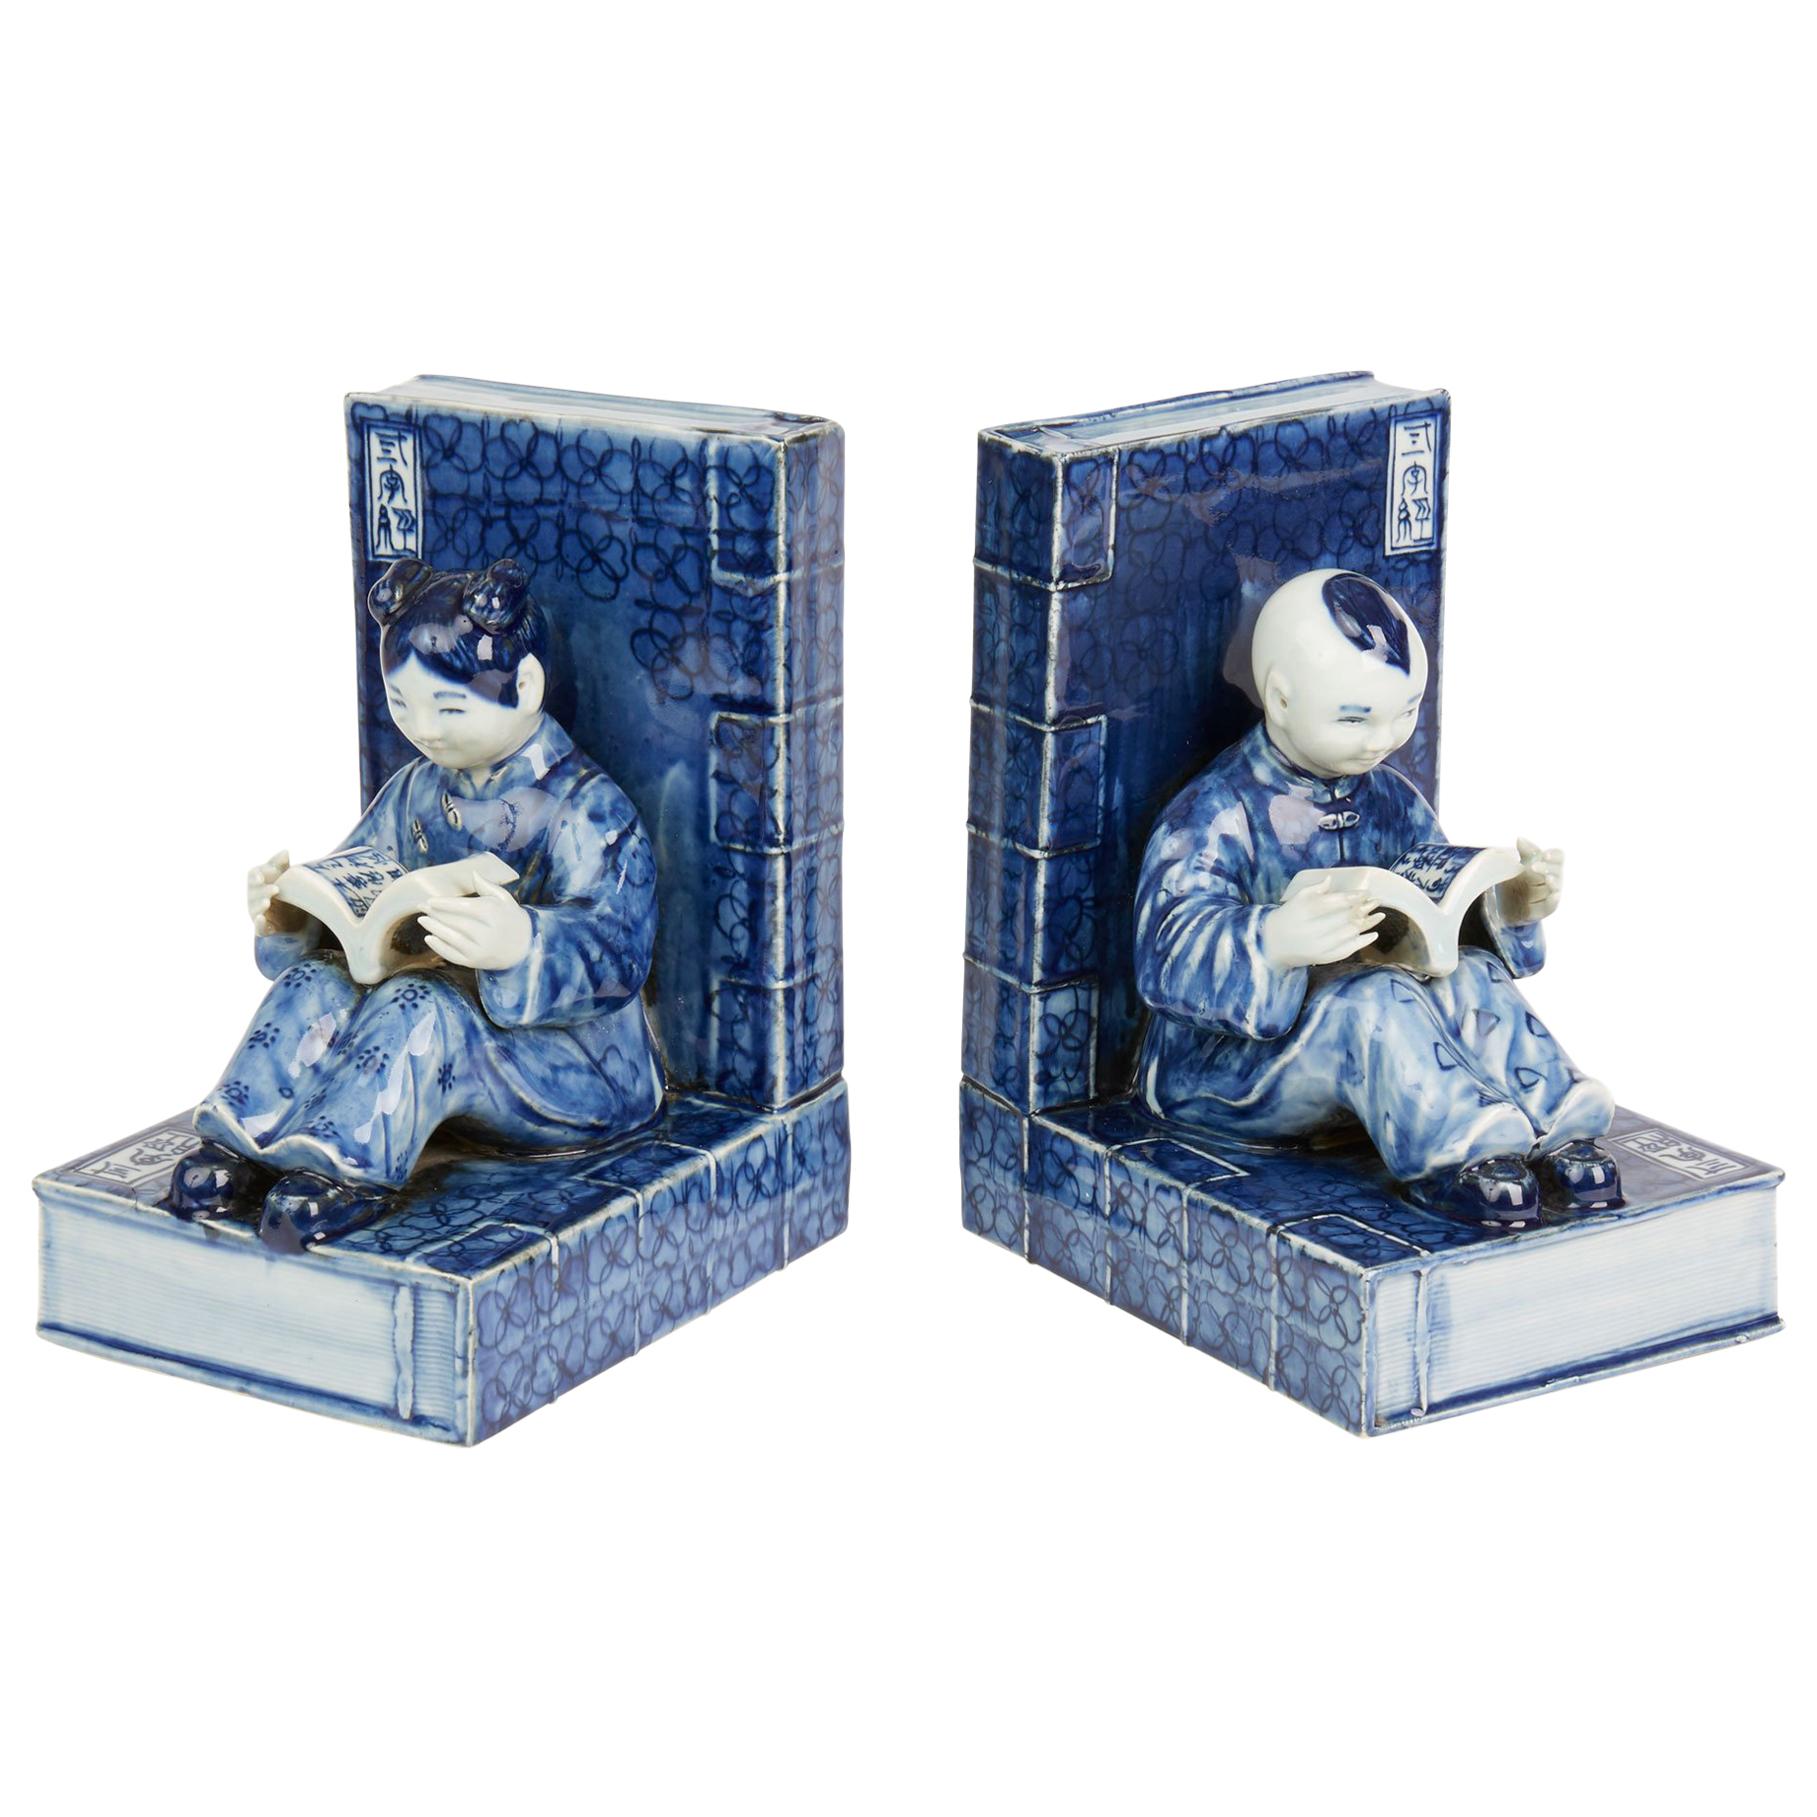 Pair of Chinese Republic Porcelain Figural Bookends